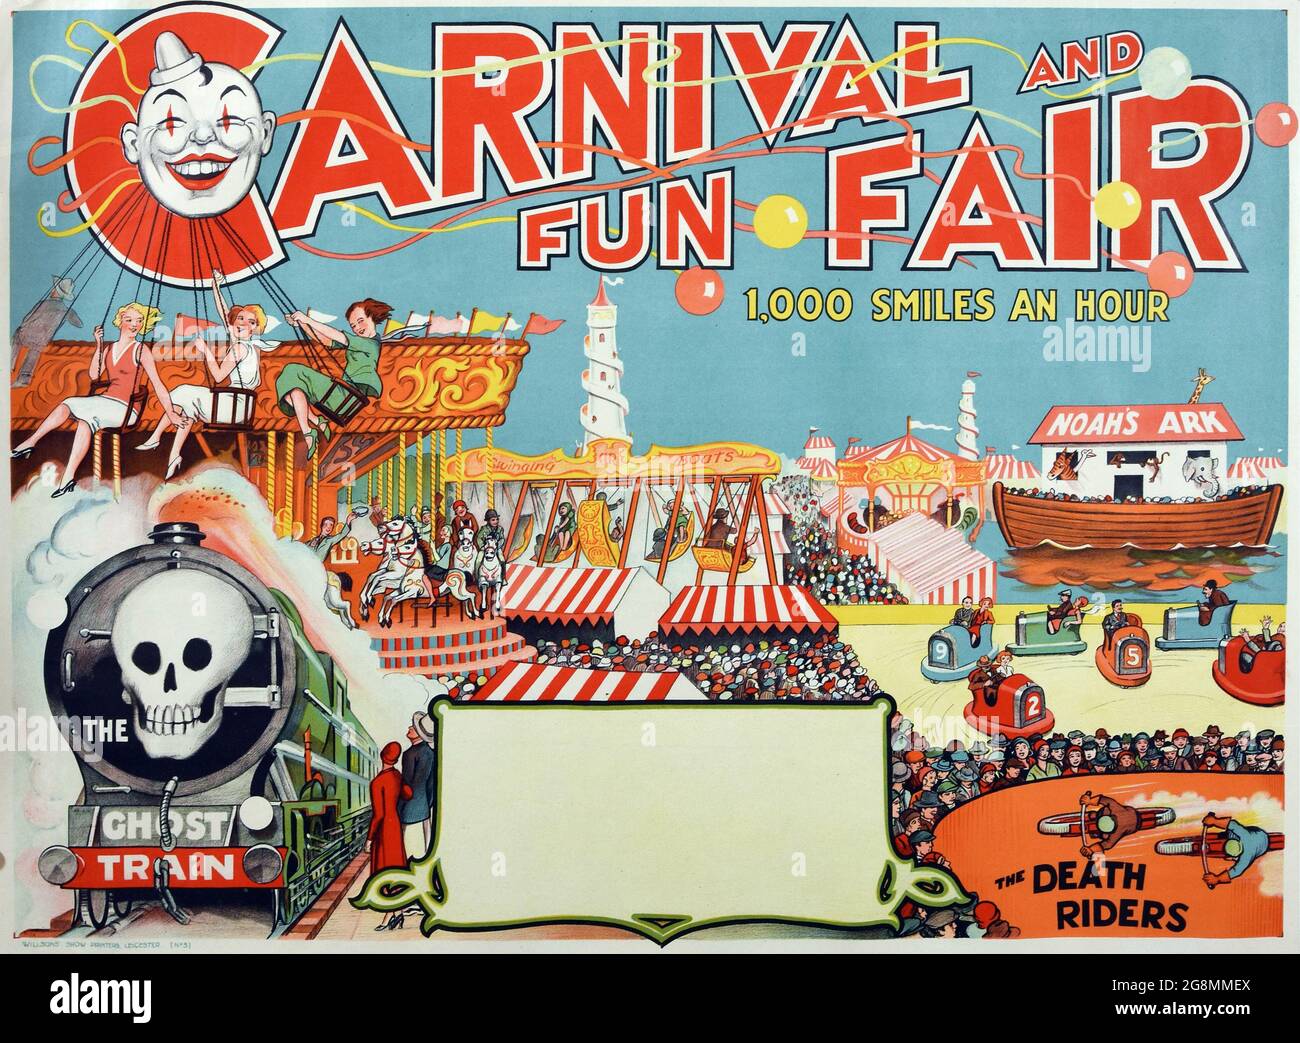 Vintage Circus poster: Carnival and Fun Fair. '1,000 smiles an hour. Ghost Train. The Death Riders.' 1920s. Stock Photo